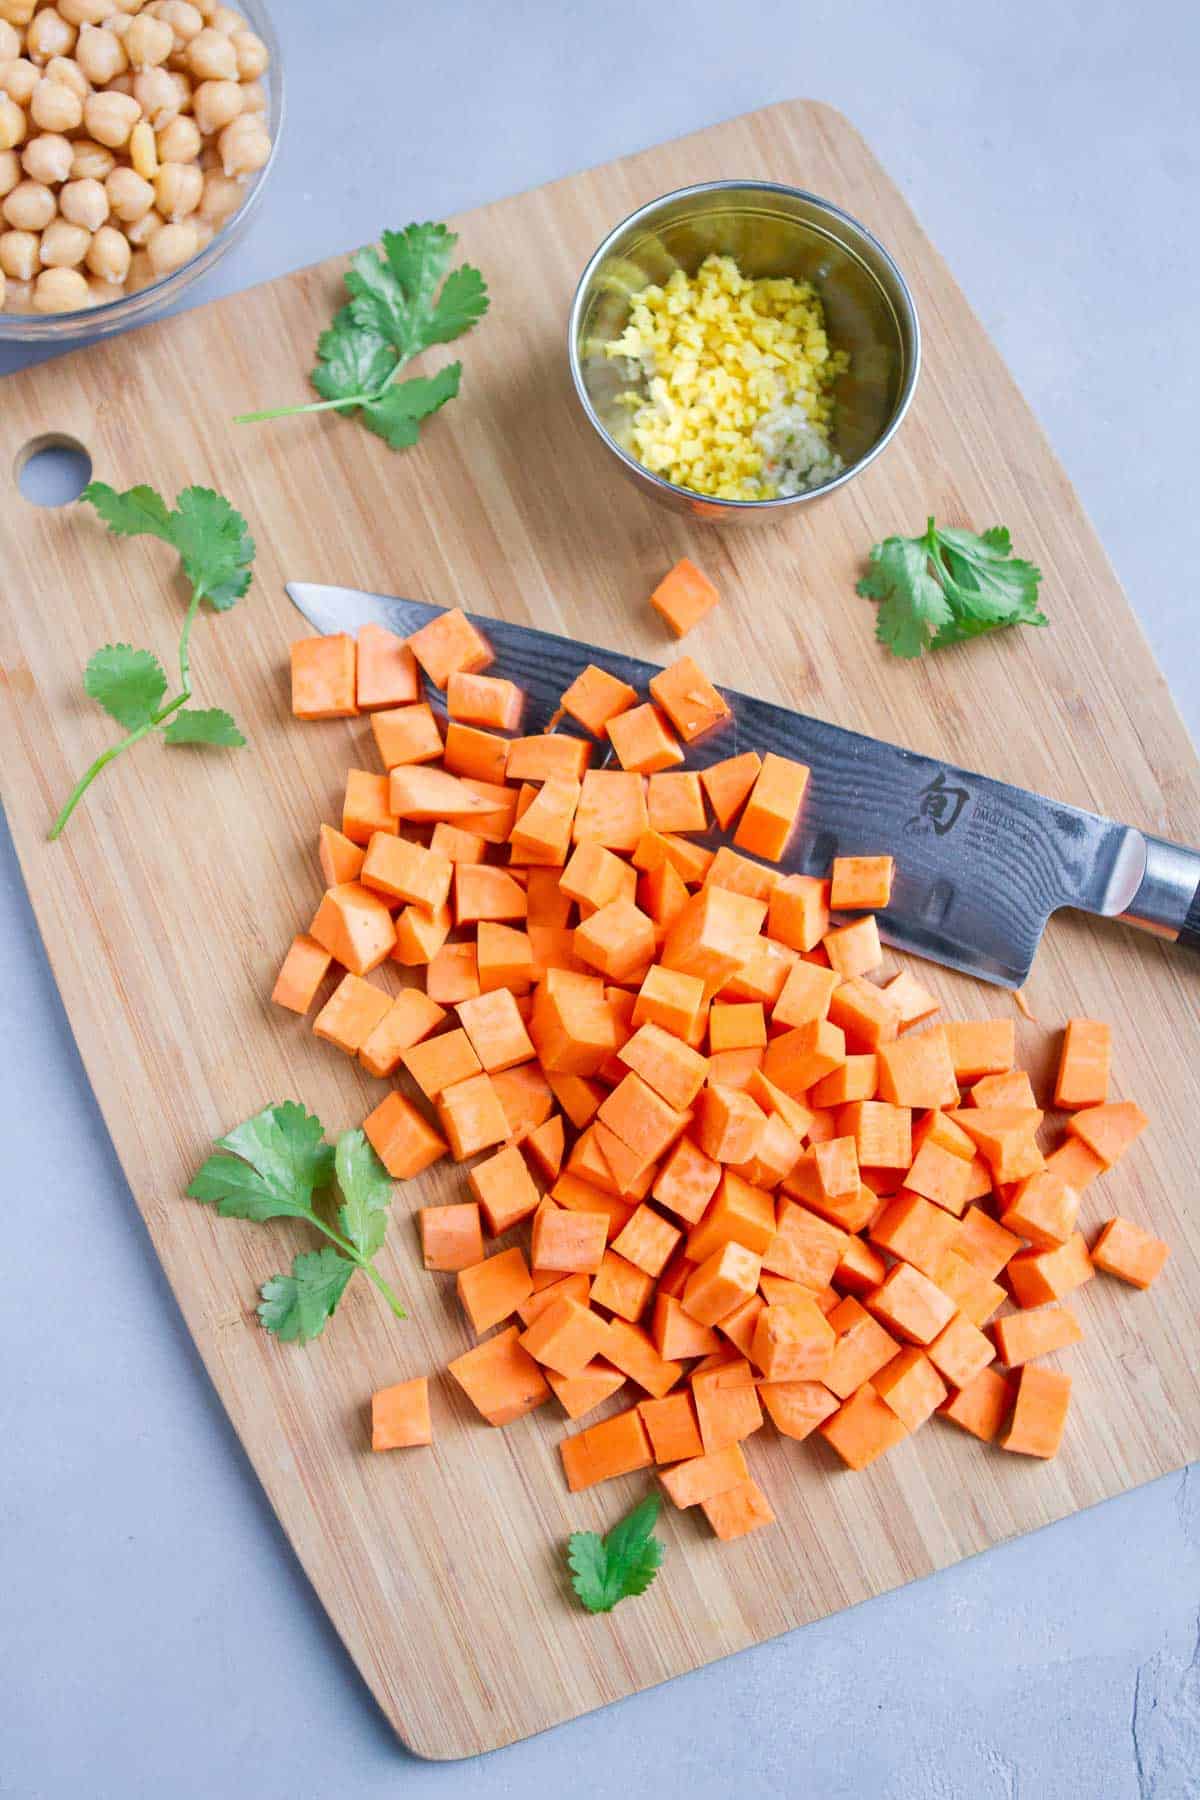 Chopped sweet potato, grated ginger and garlic and chickpeas on a bamboo cutting board.